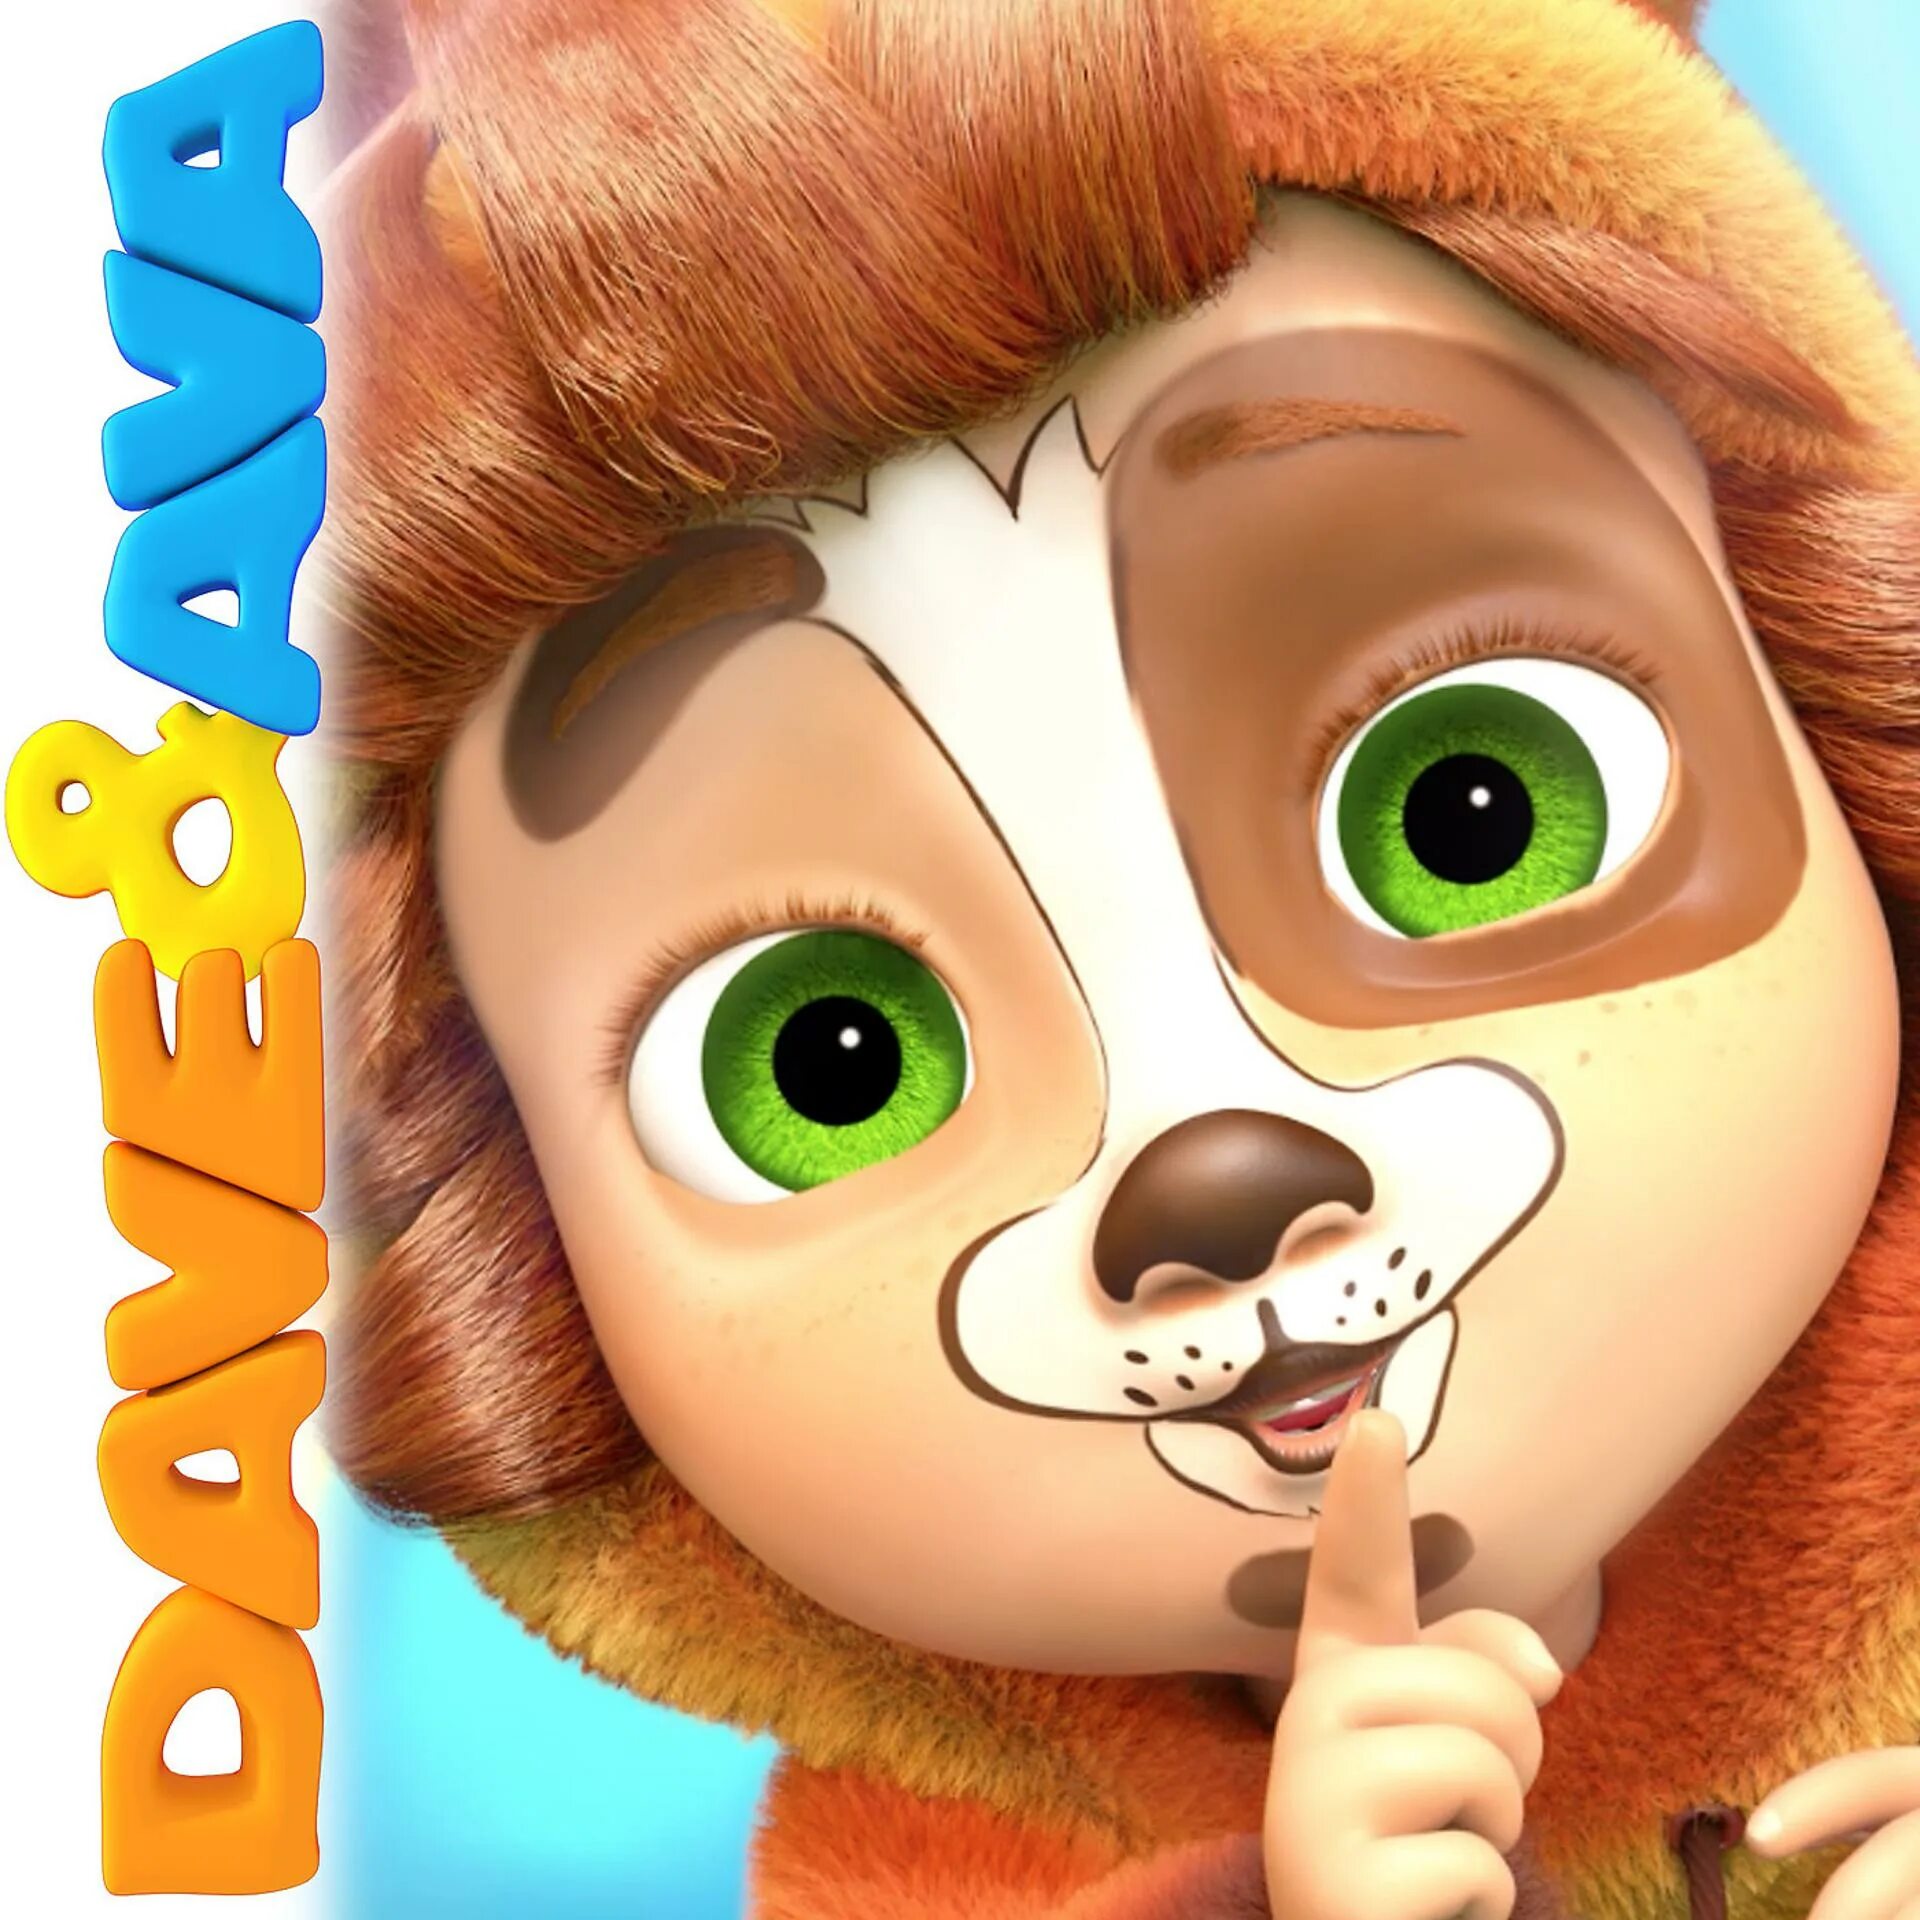 Dave and Ava Nursery Rhymes. Dave and Ava - Nursery Rhymes and Baby Songs.